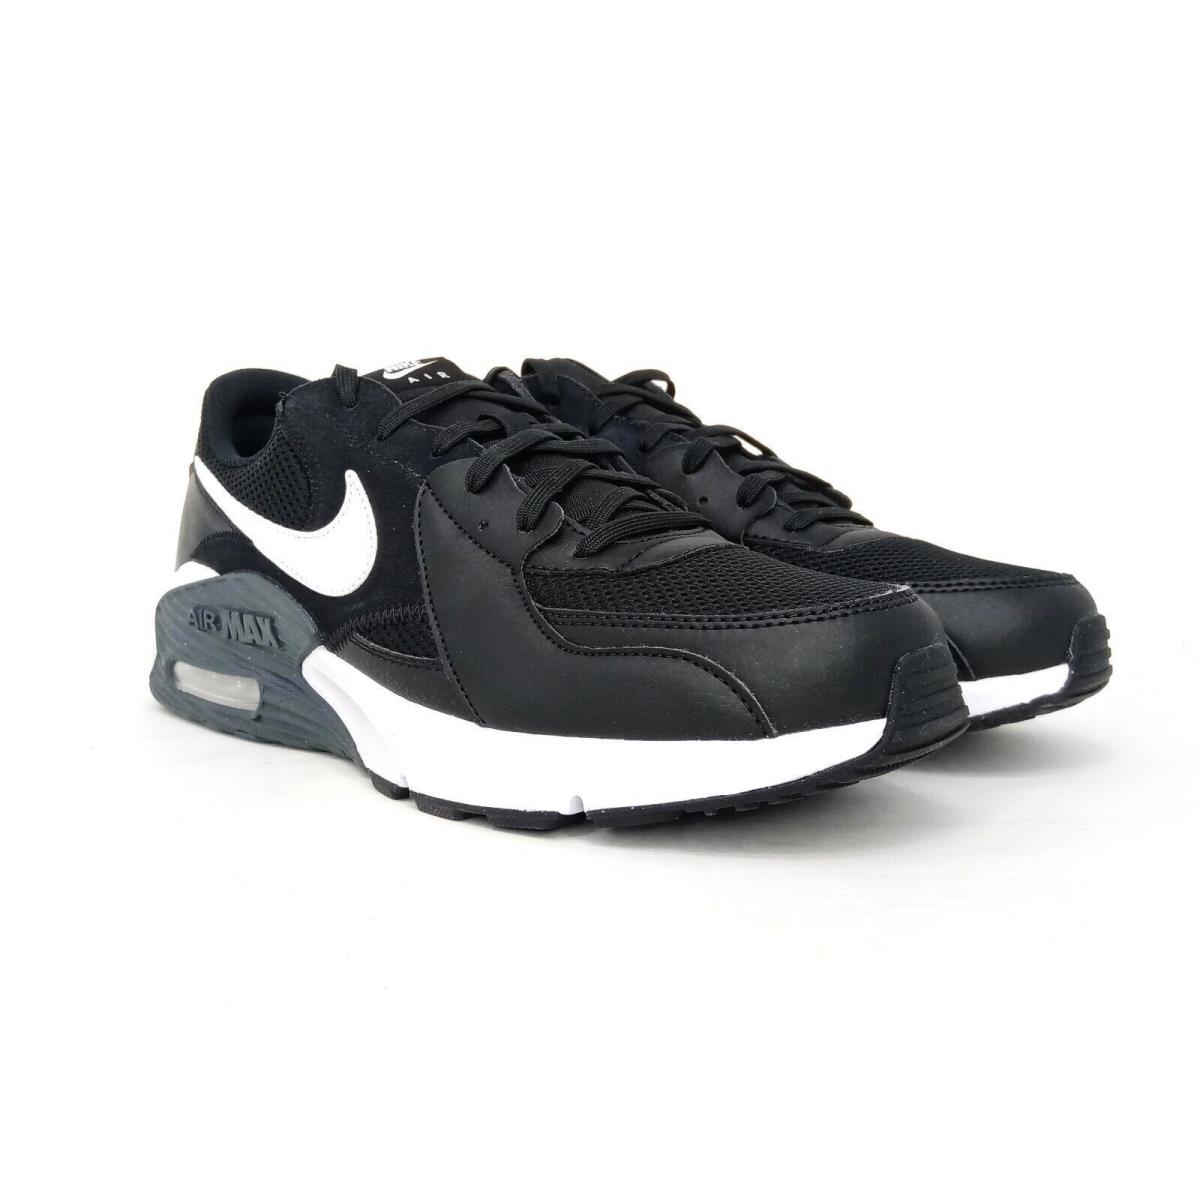 Men`s Nike CD4165 001 Air Max Excee Black/white Shoes Sneakers - BLACK/WHITE/GREY